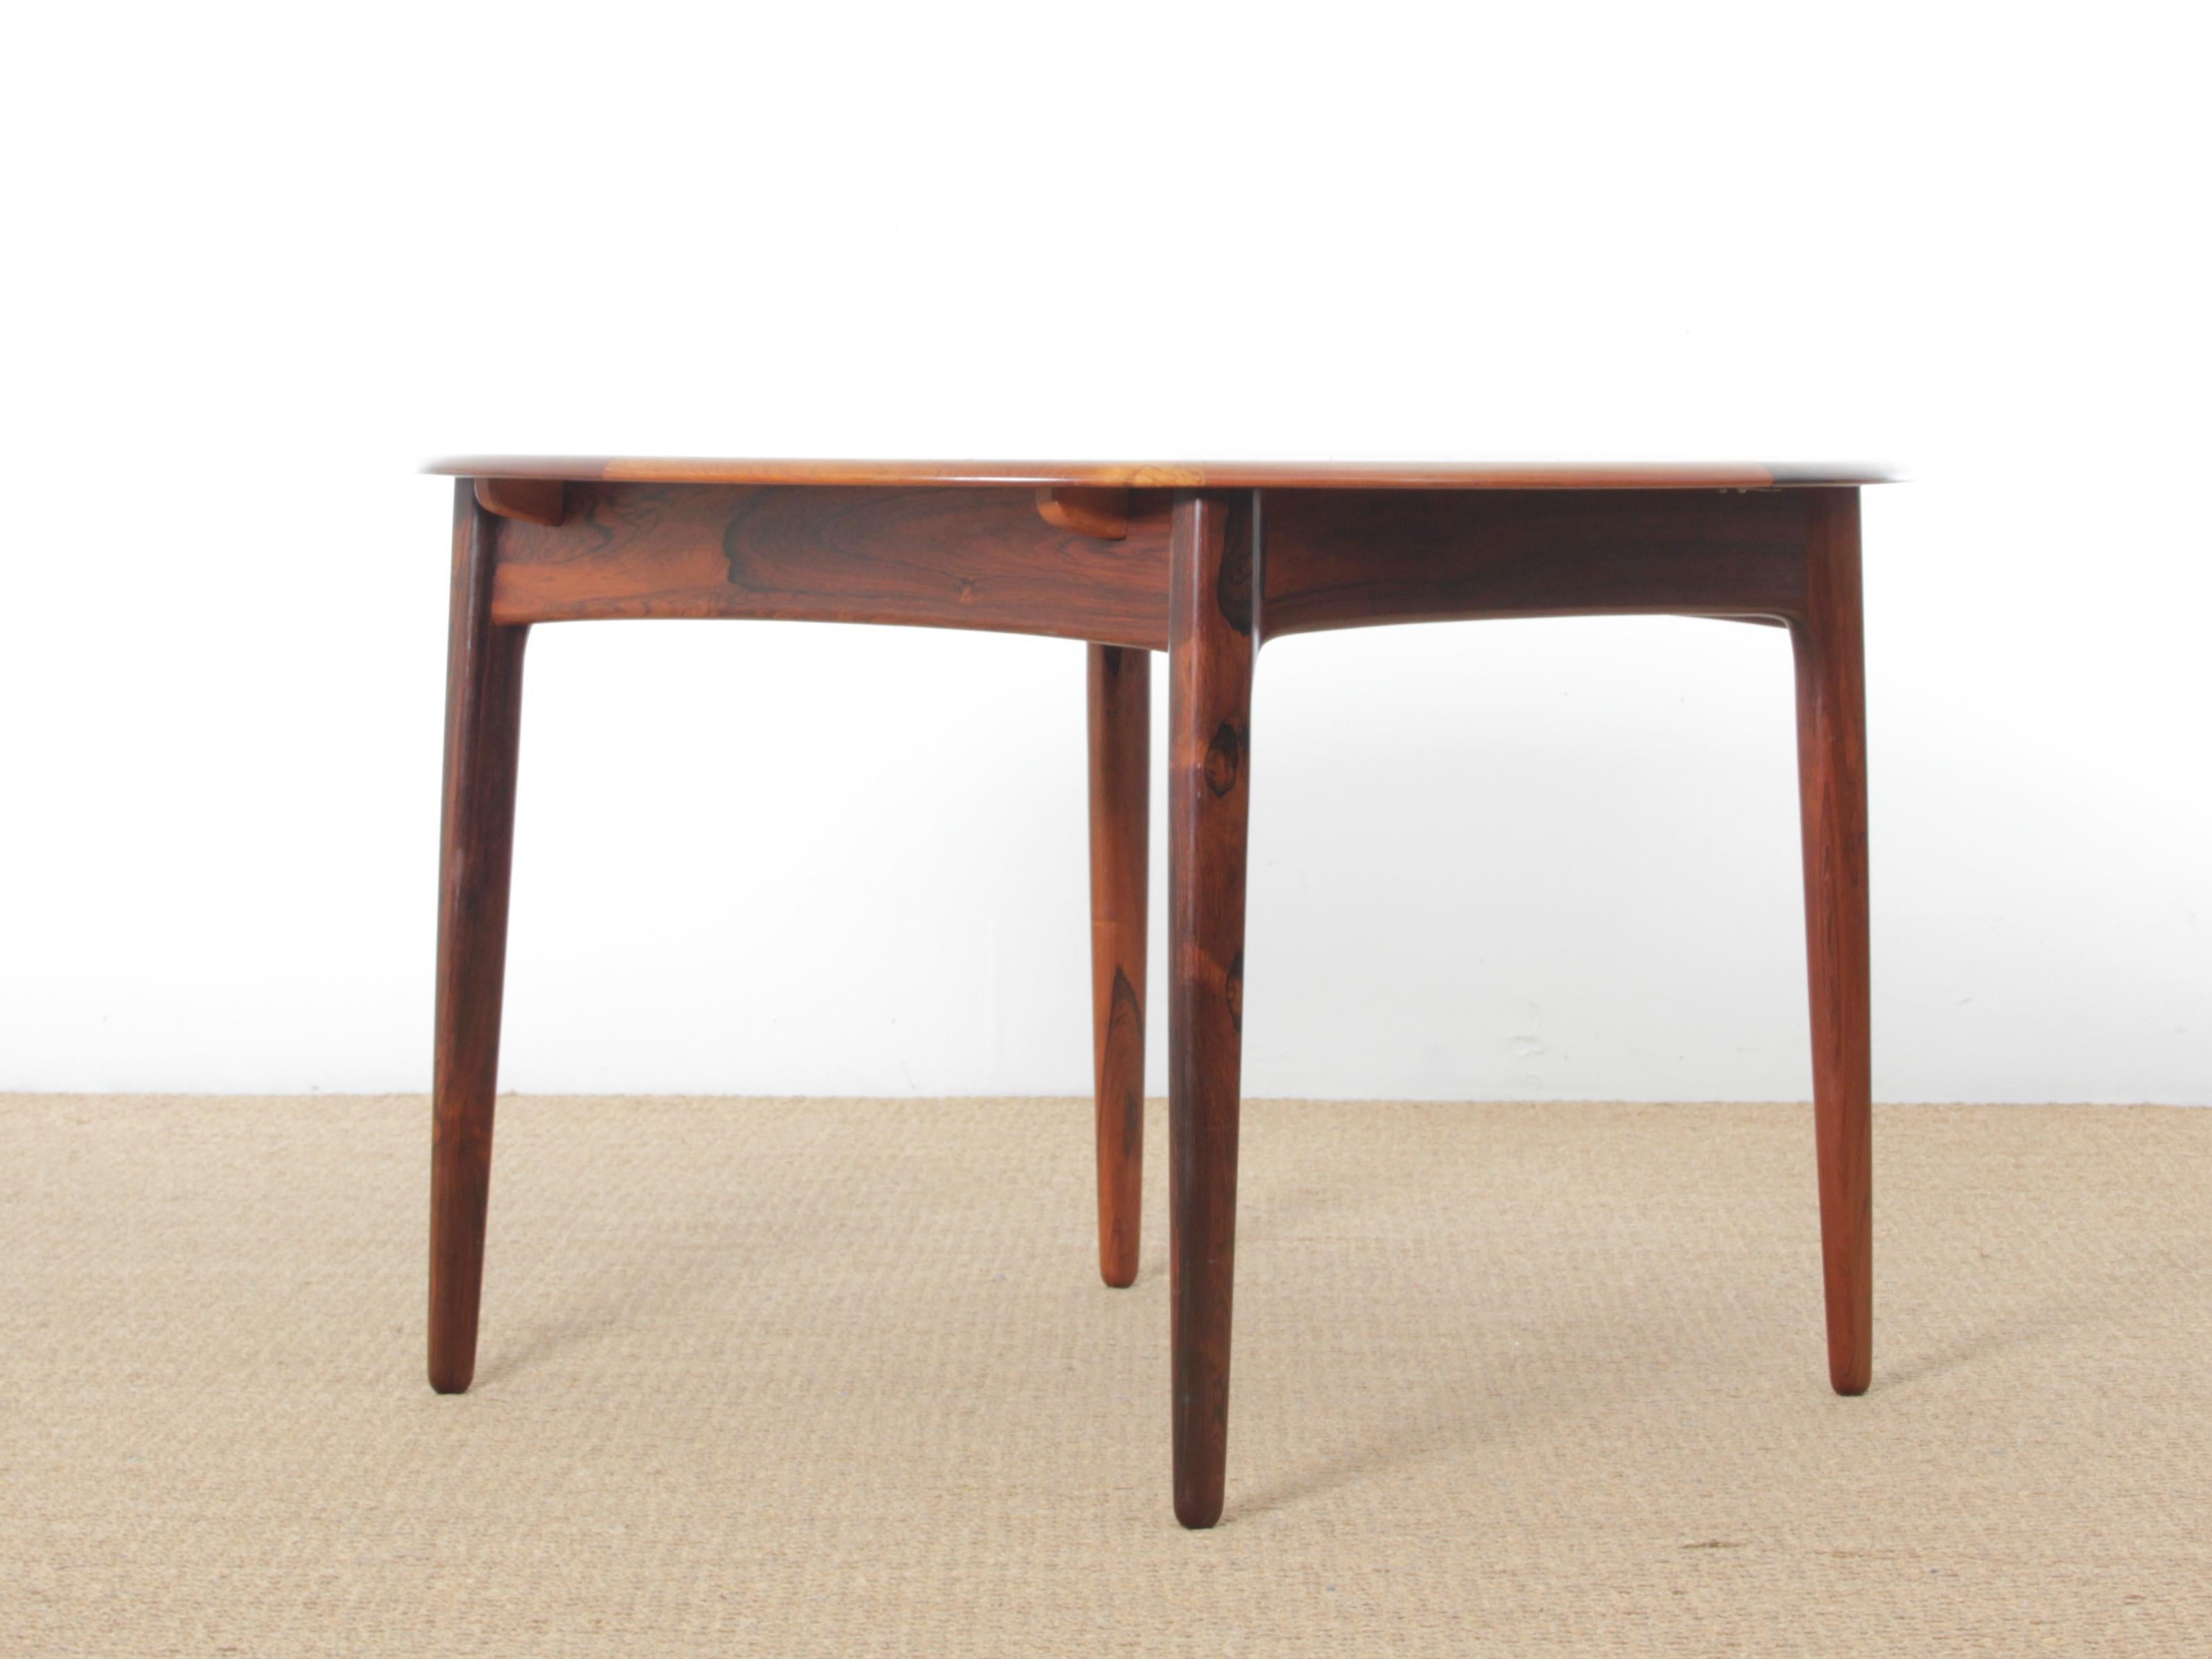 Mid-Century Modern Scandinavian round dining table in rosewood 6/8 seats. Solid rosewood frame. 2 small extension leaves.